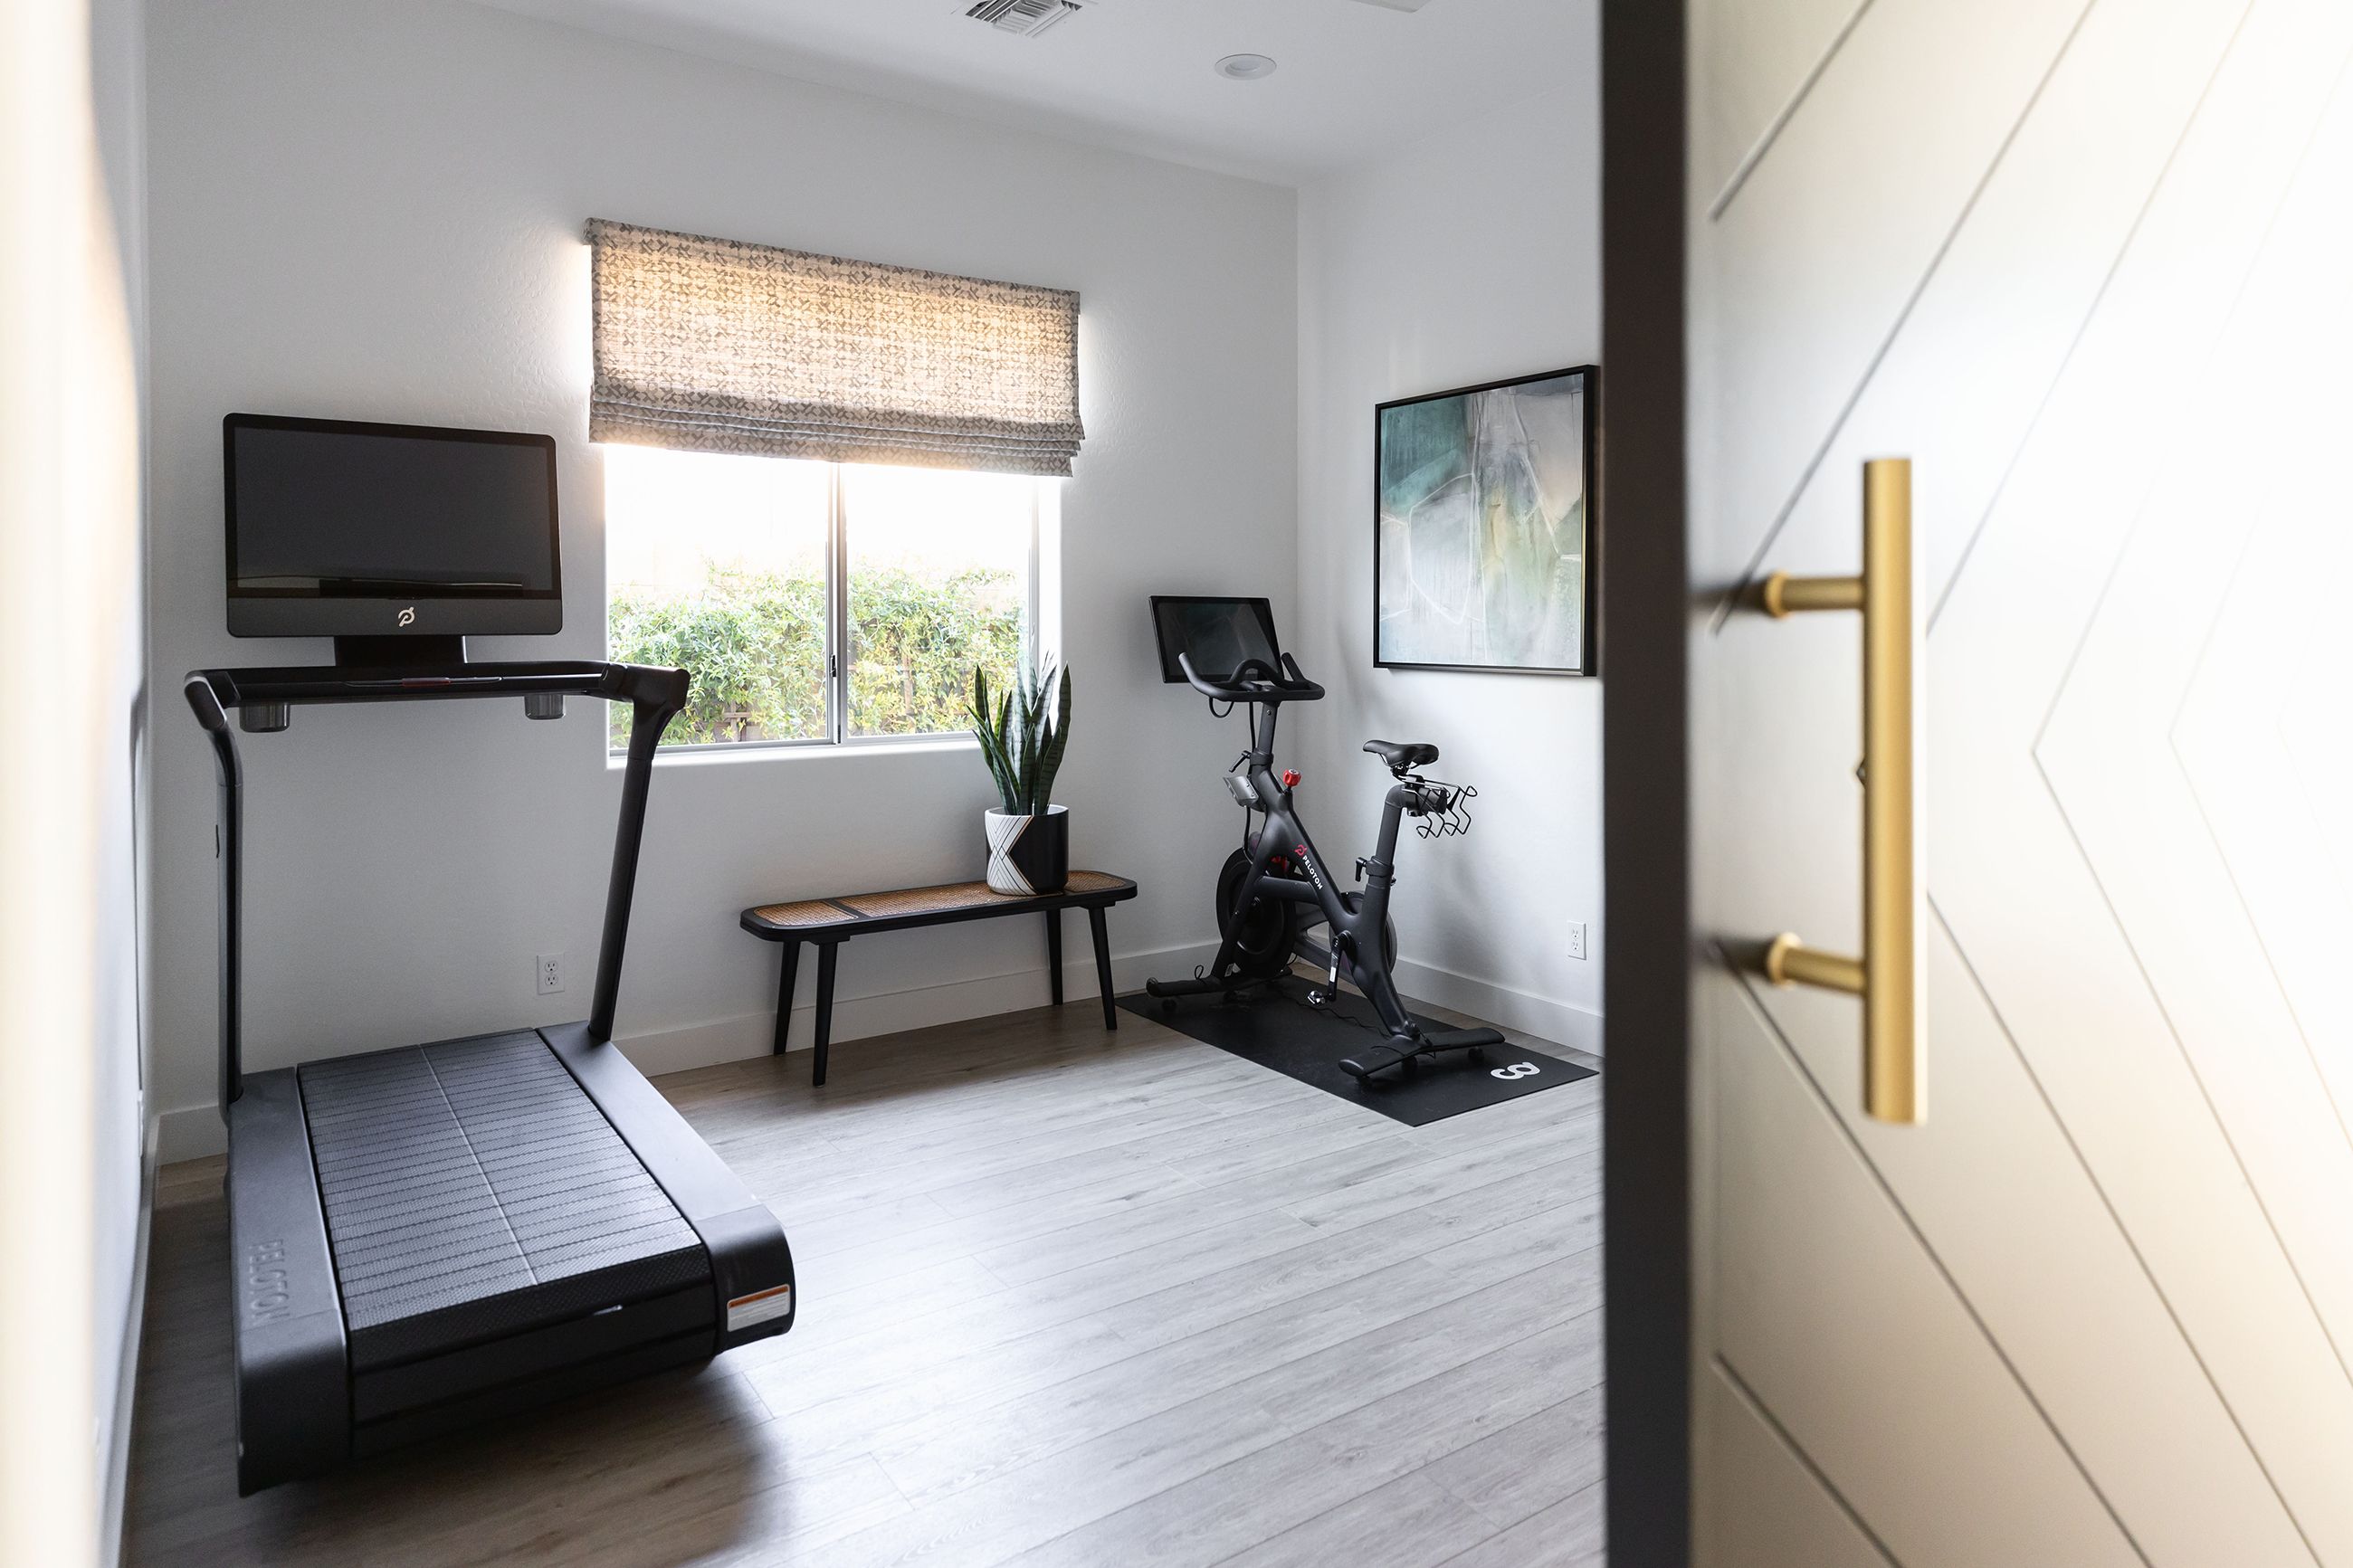 25 Small Home Gym Ideas To Suit Any Space